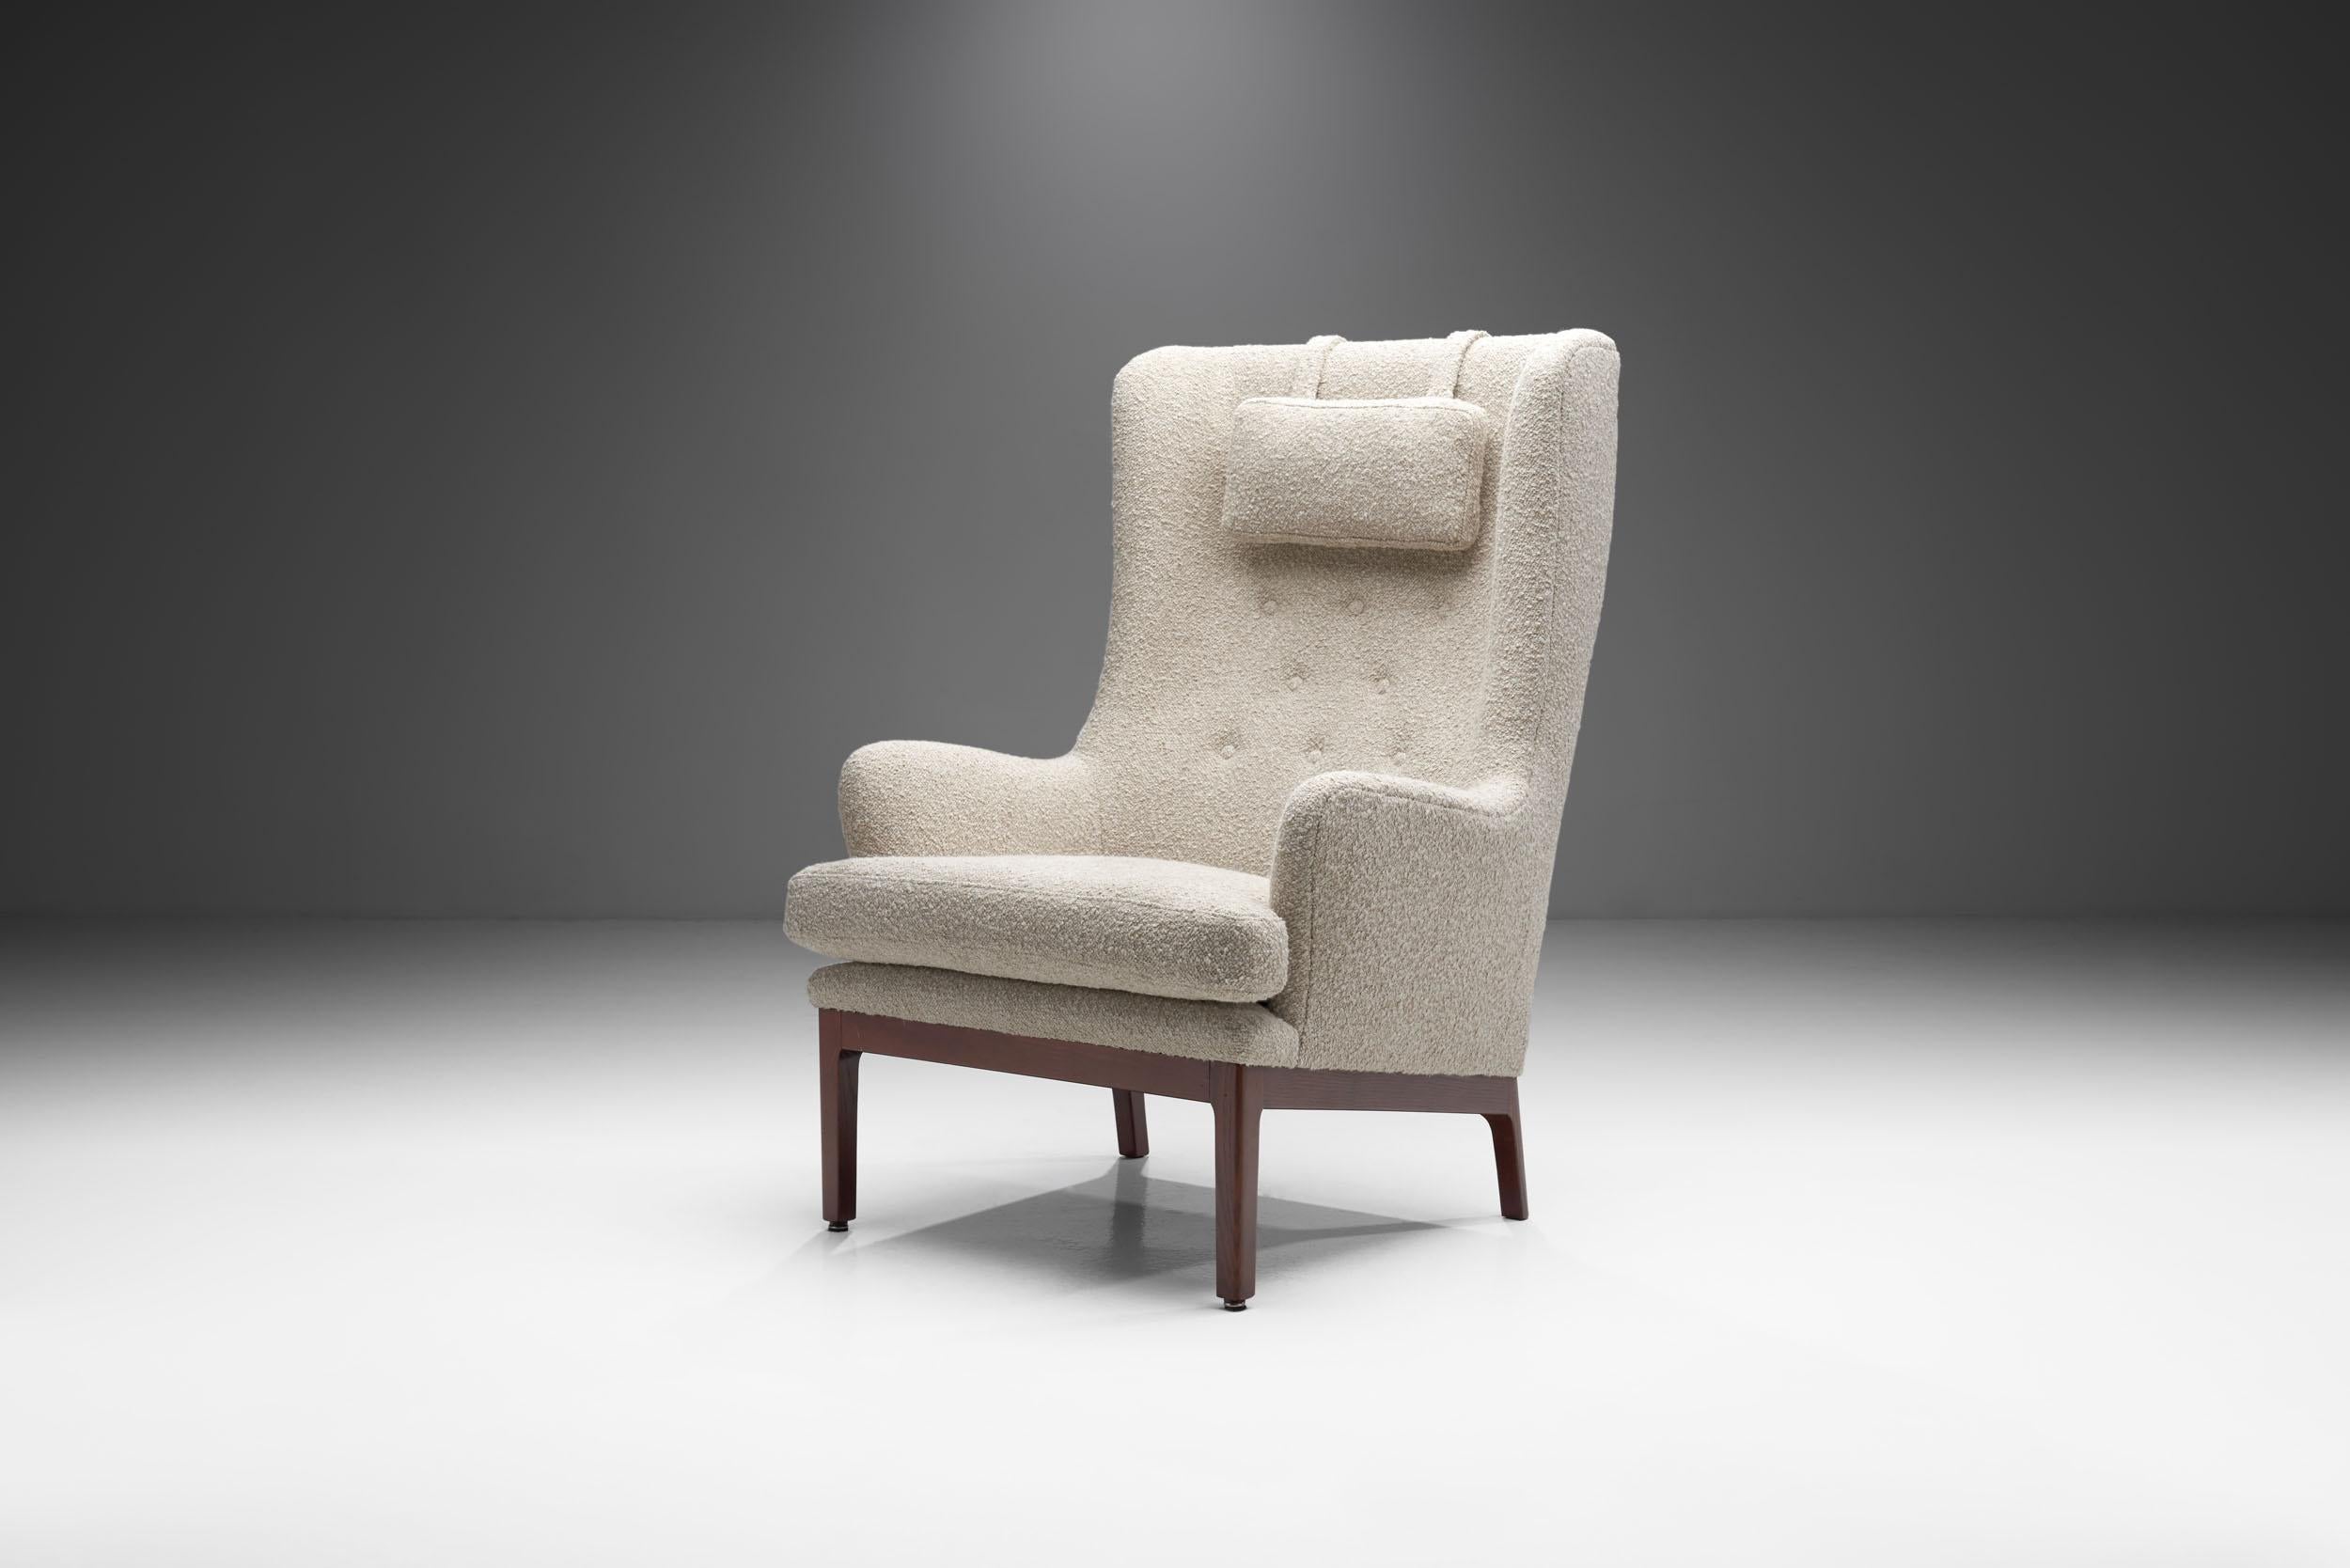 This “Krister” is a true Swedish design icon, and is among Arne Norell’s cosiest works. This high-back armchair’s comfort is only rivalled by its stylishness and elegance. Arne Norell was a household name within the interior design-world of Europe,